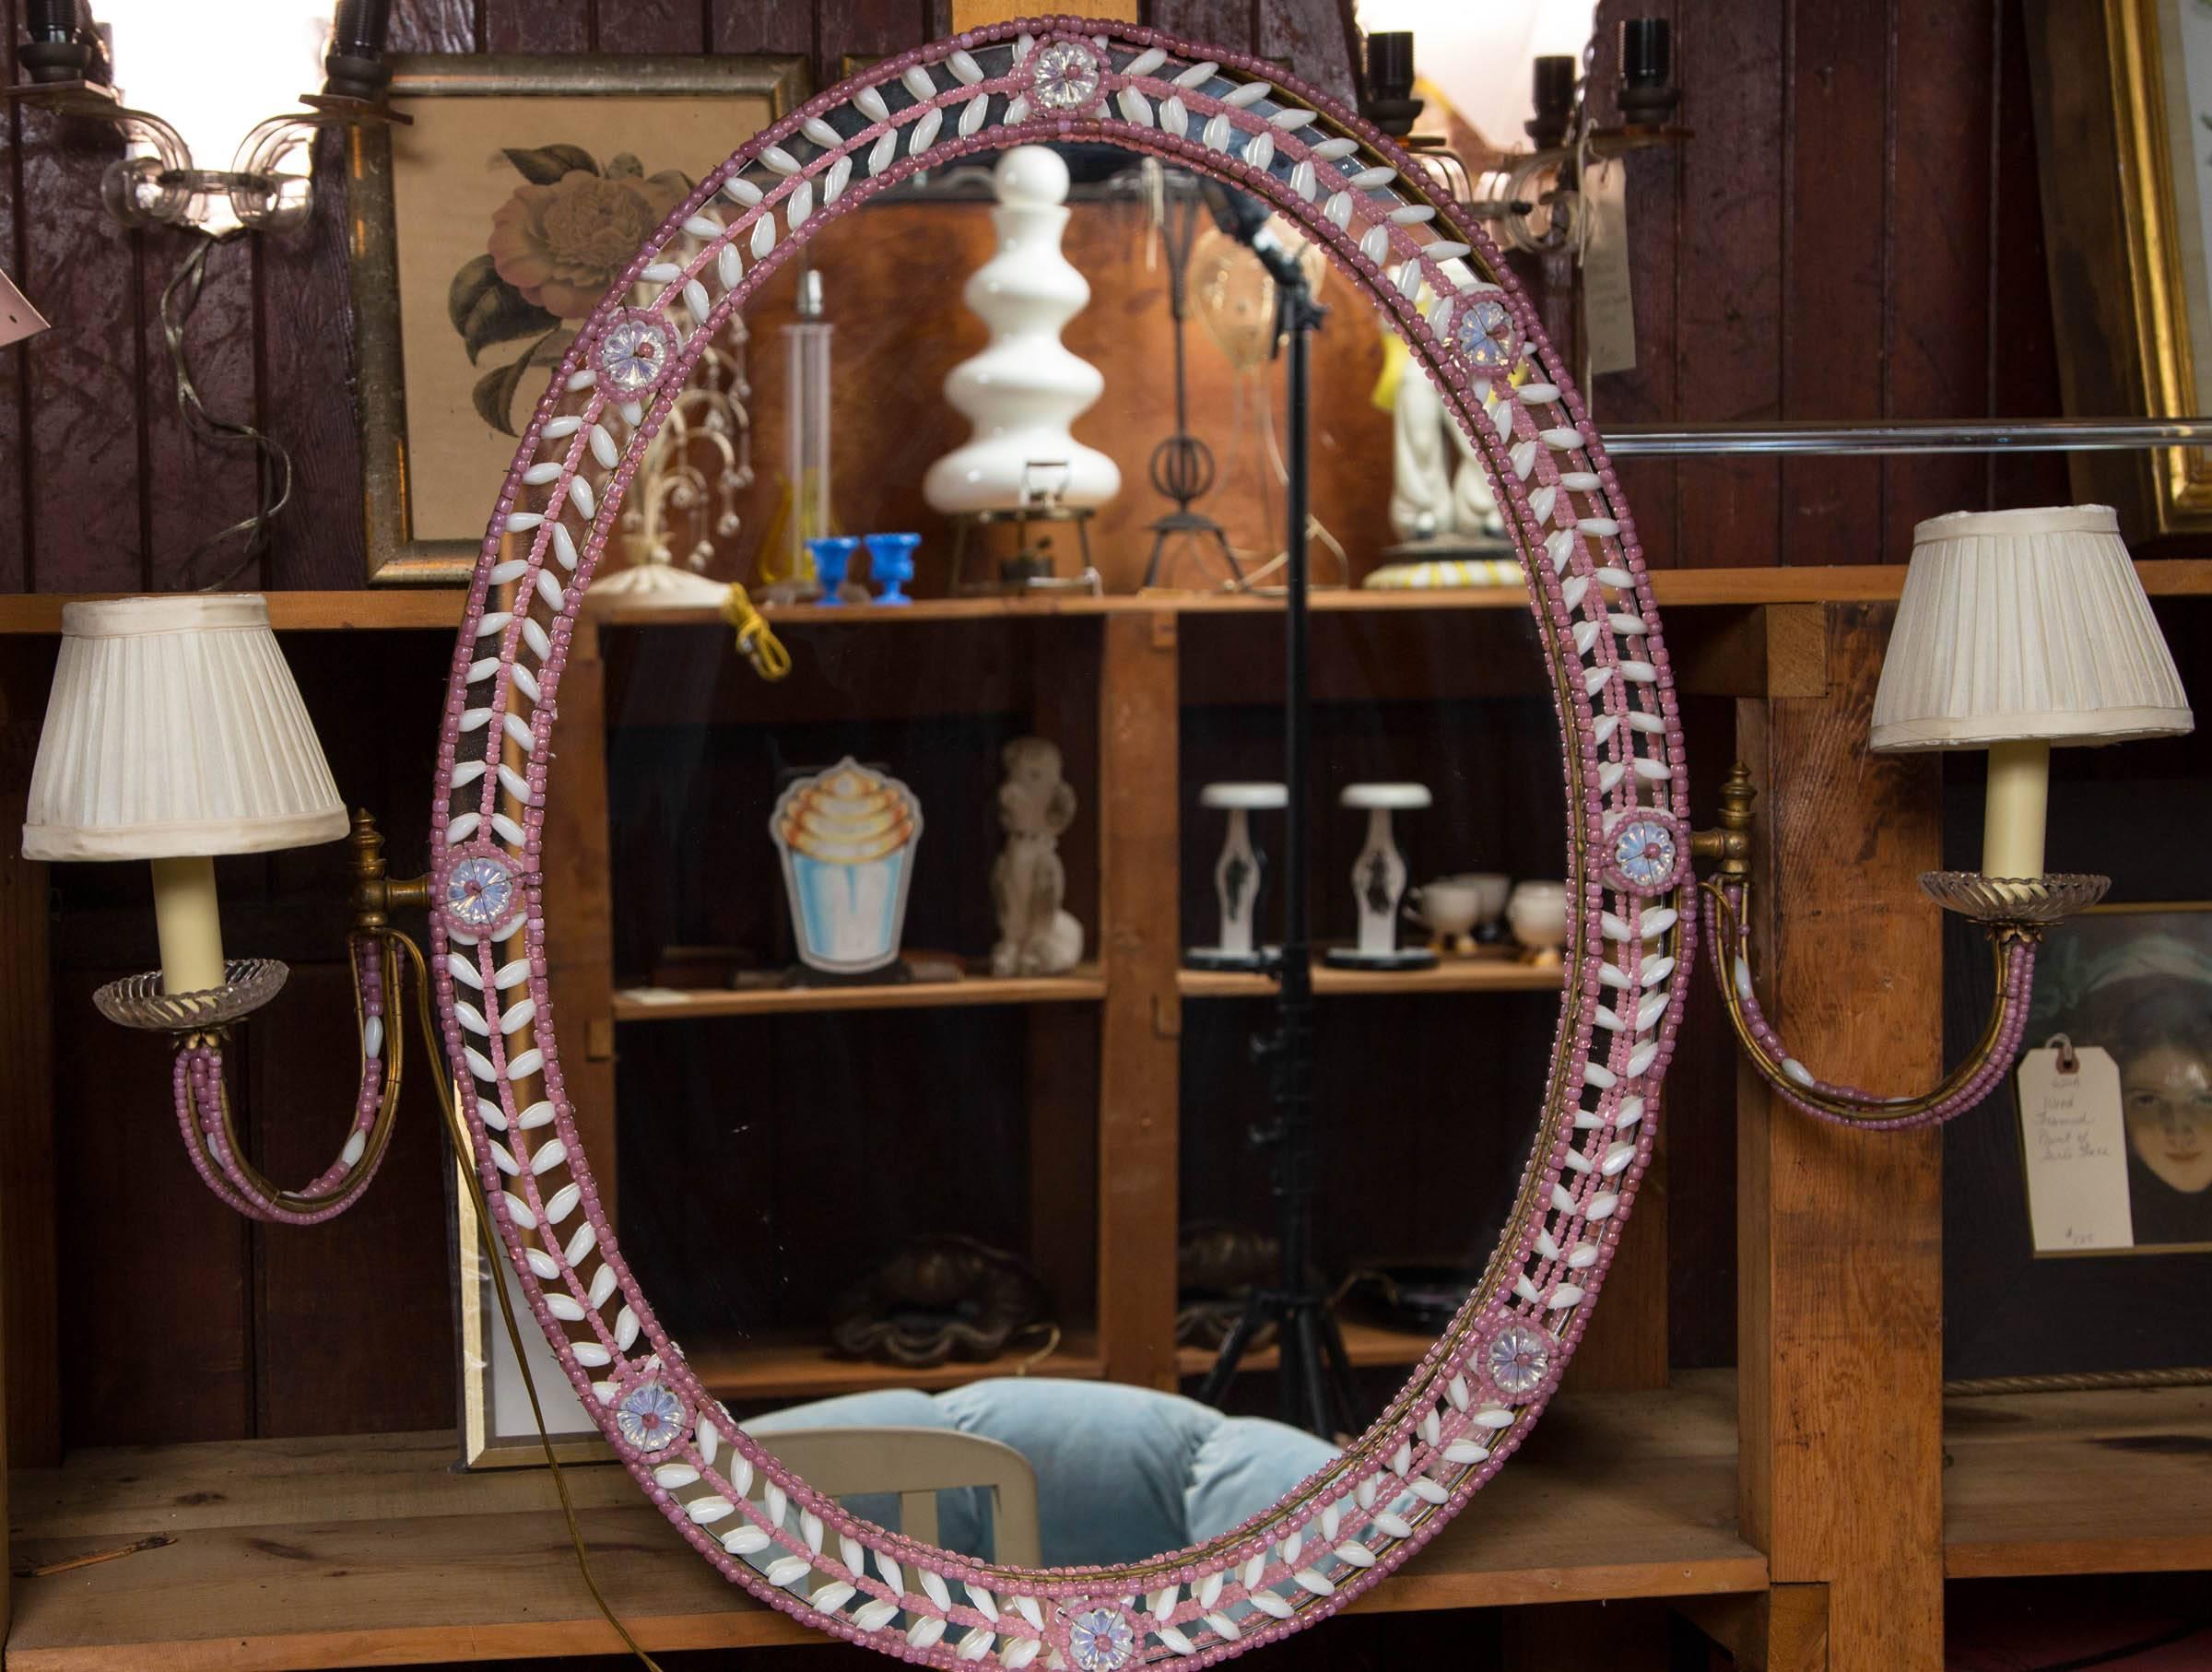 French pink and white glass beaded oval mirror and attached sconces.
37 inched wide with existing shades.